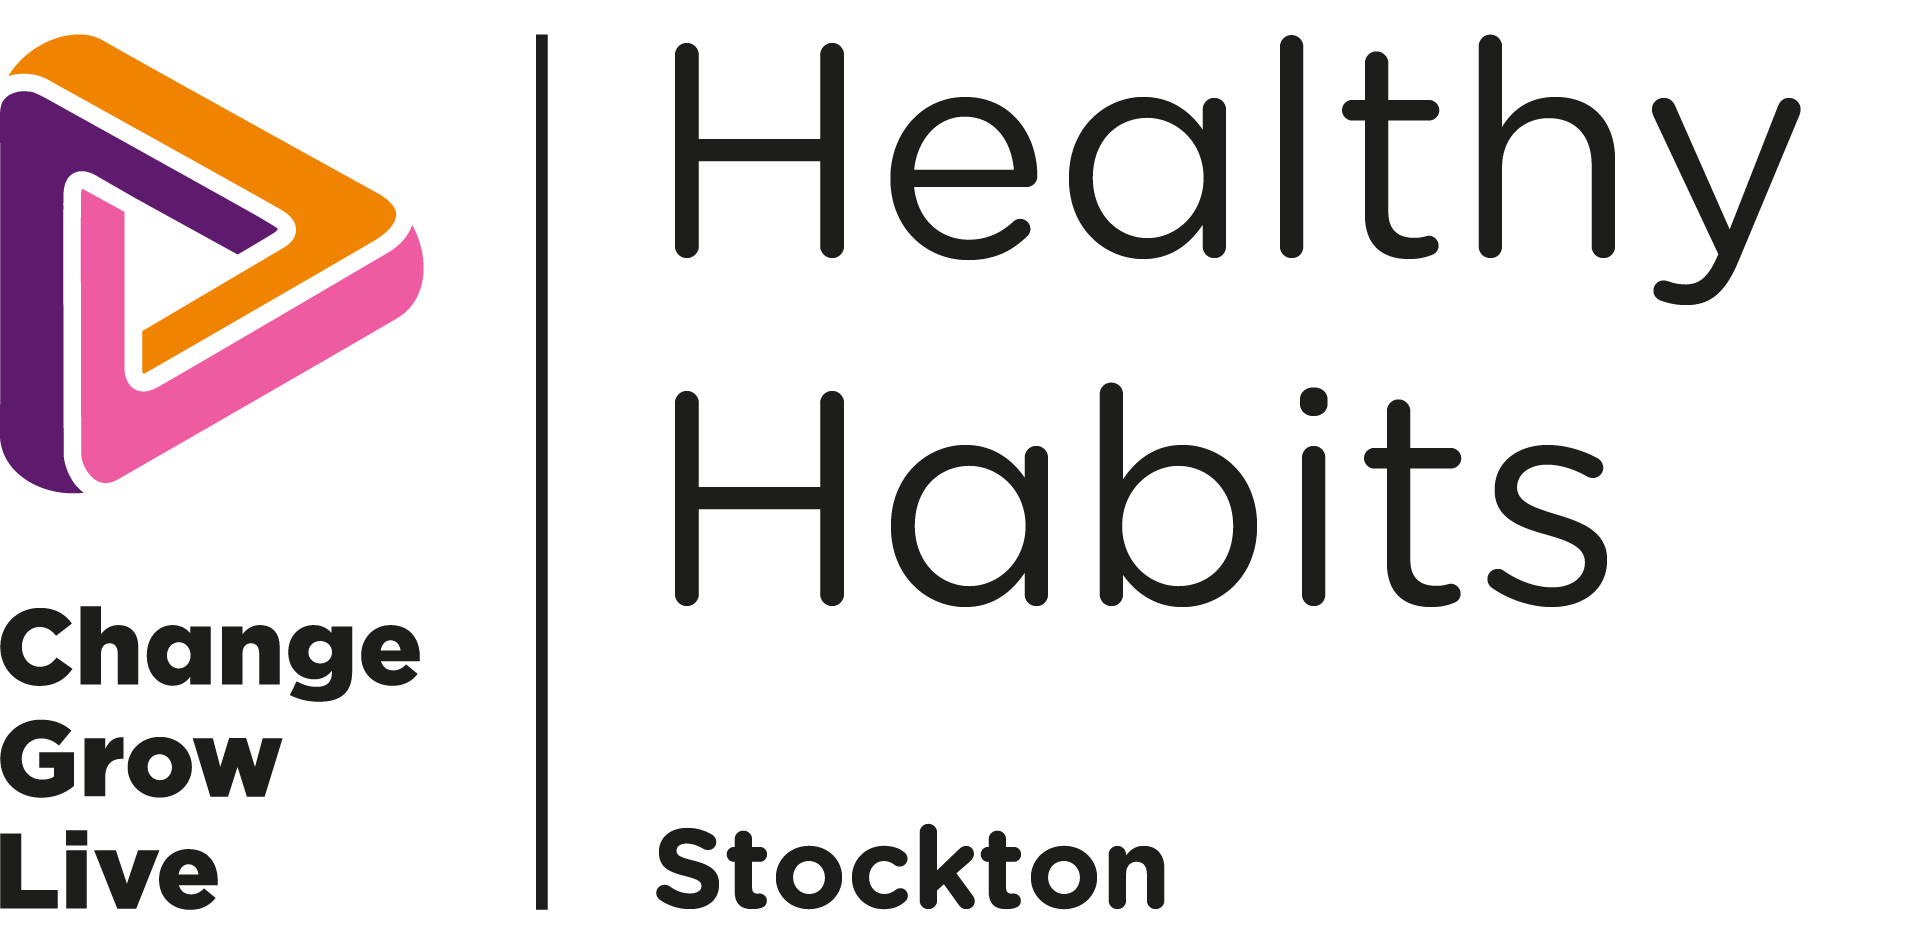 The logo for healthy habits Stockton in colour